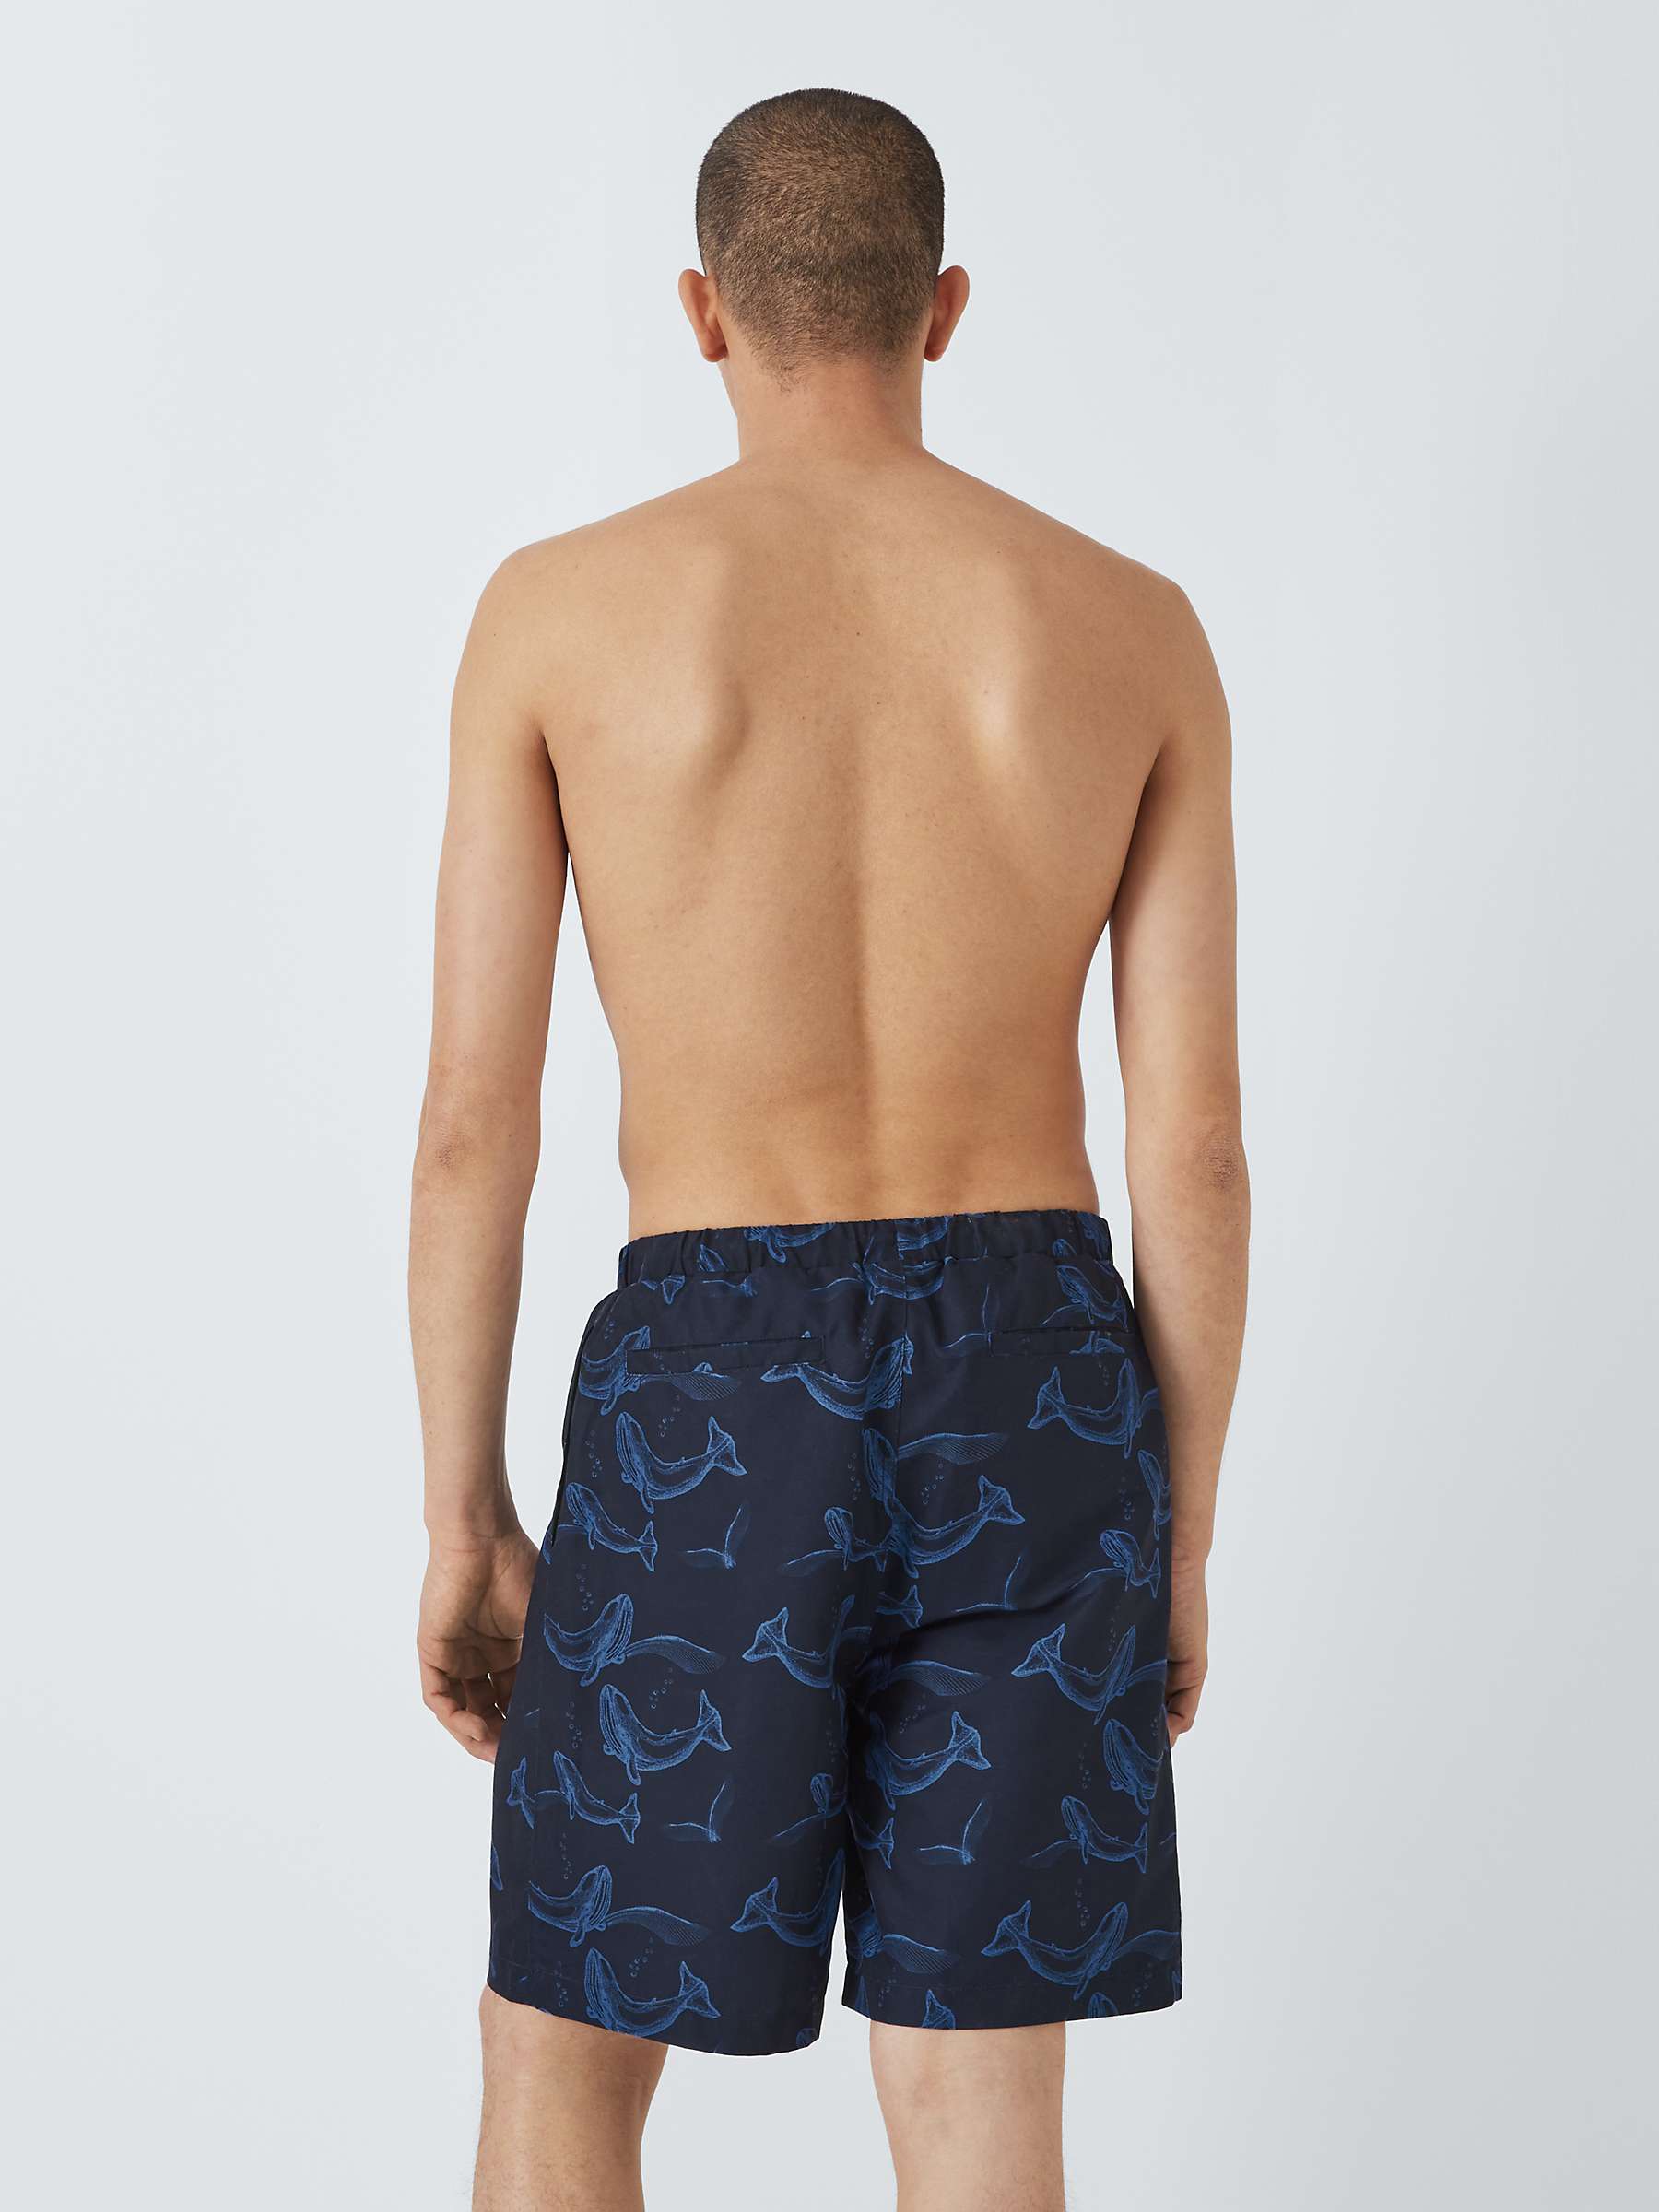 Buy Their Nibs Whale Print Swim Shorts Online at johnlewis.com